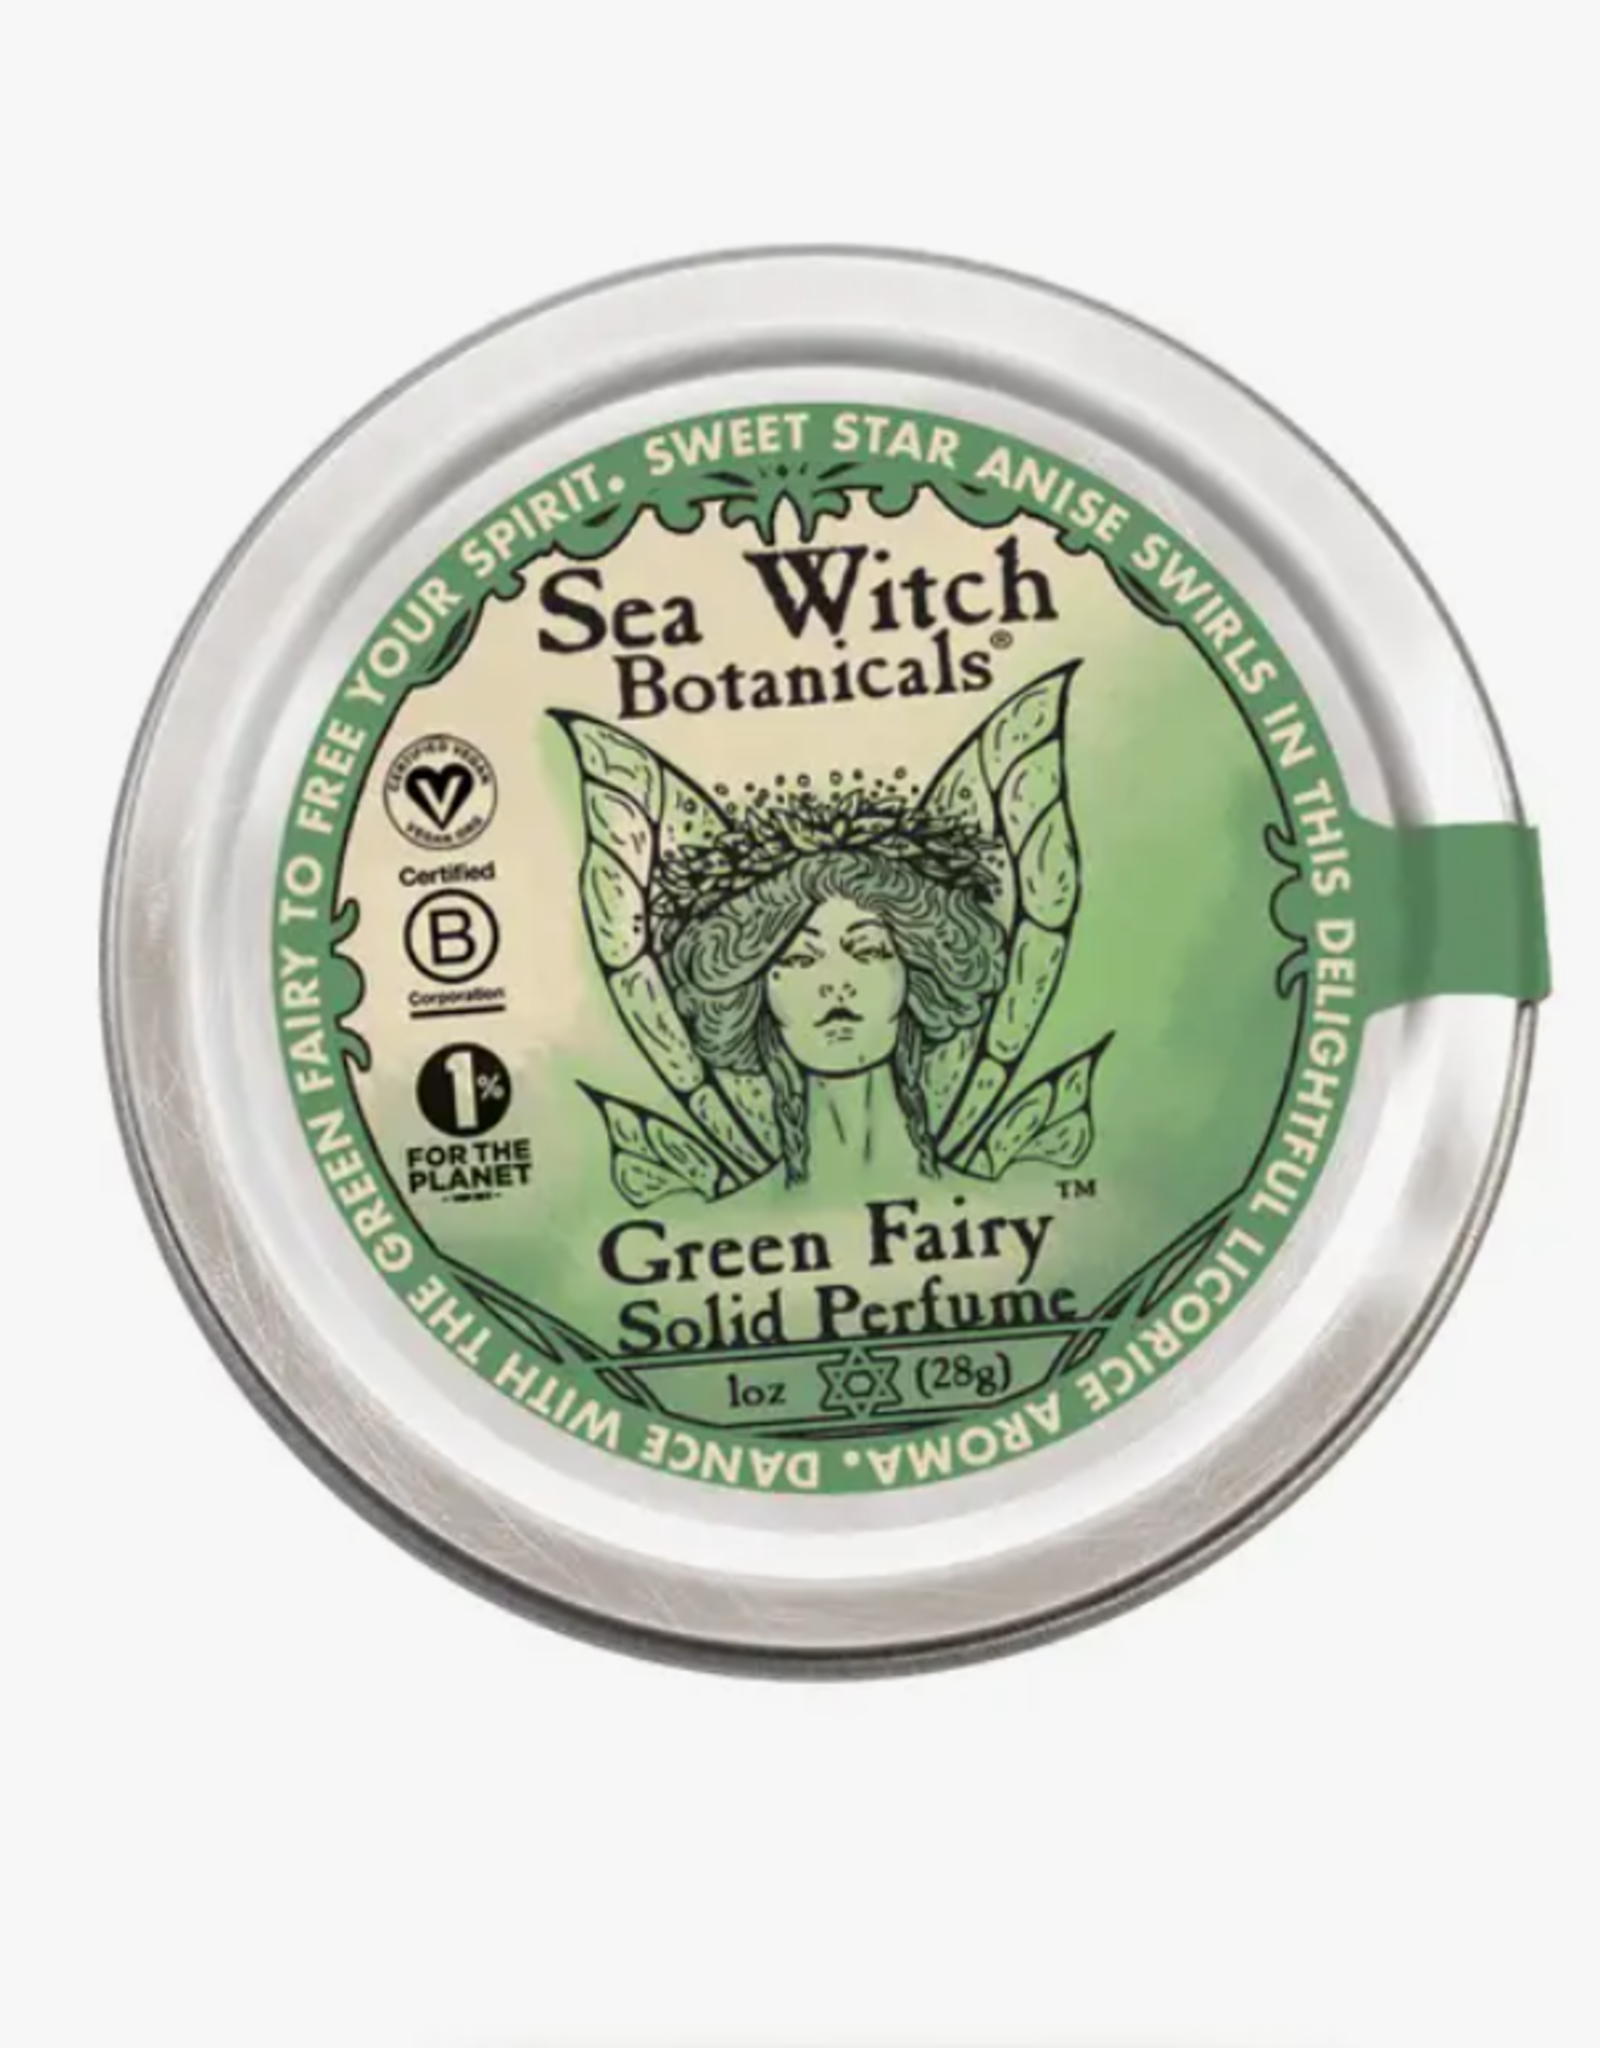 Sea Witch Botanicals *Green Fairy Solid Perfume